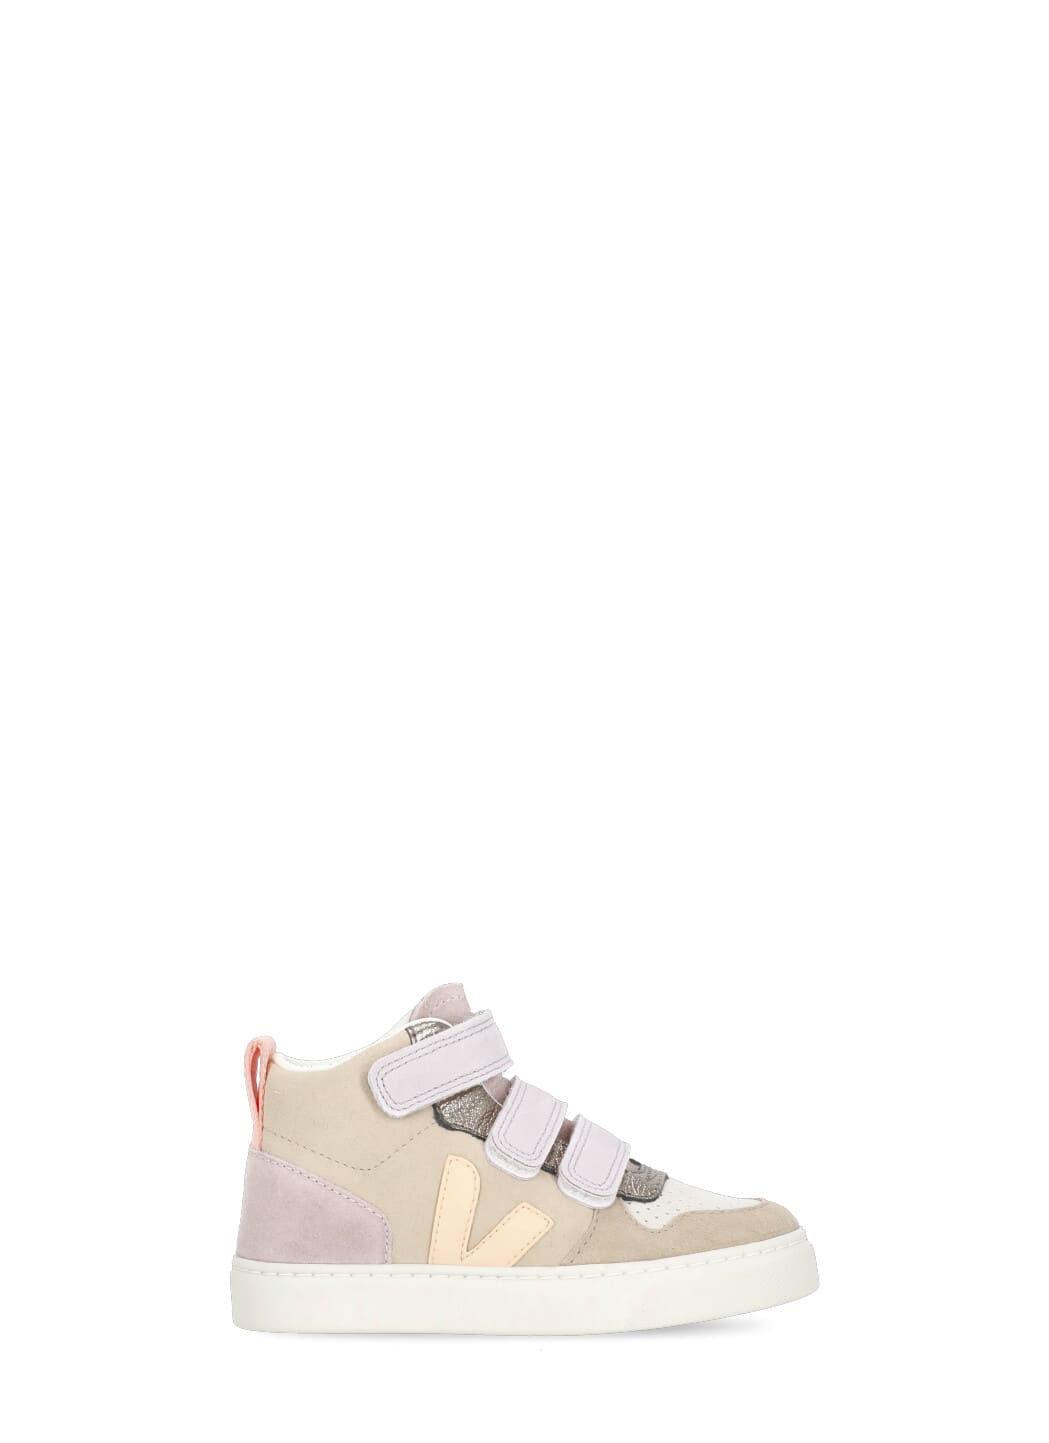 Veja Kids' Suede Leather High Sneakers In Multicolor